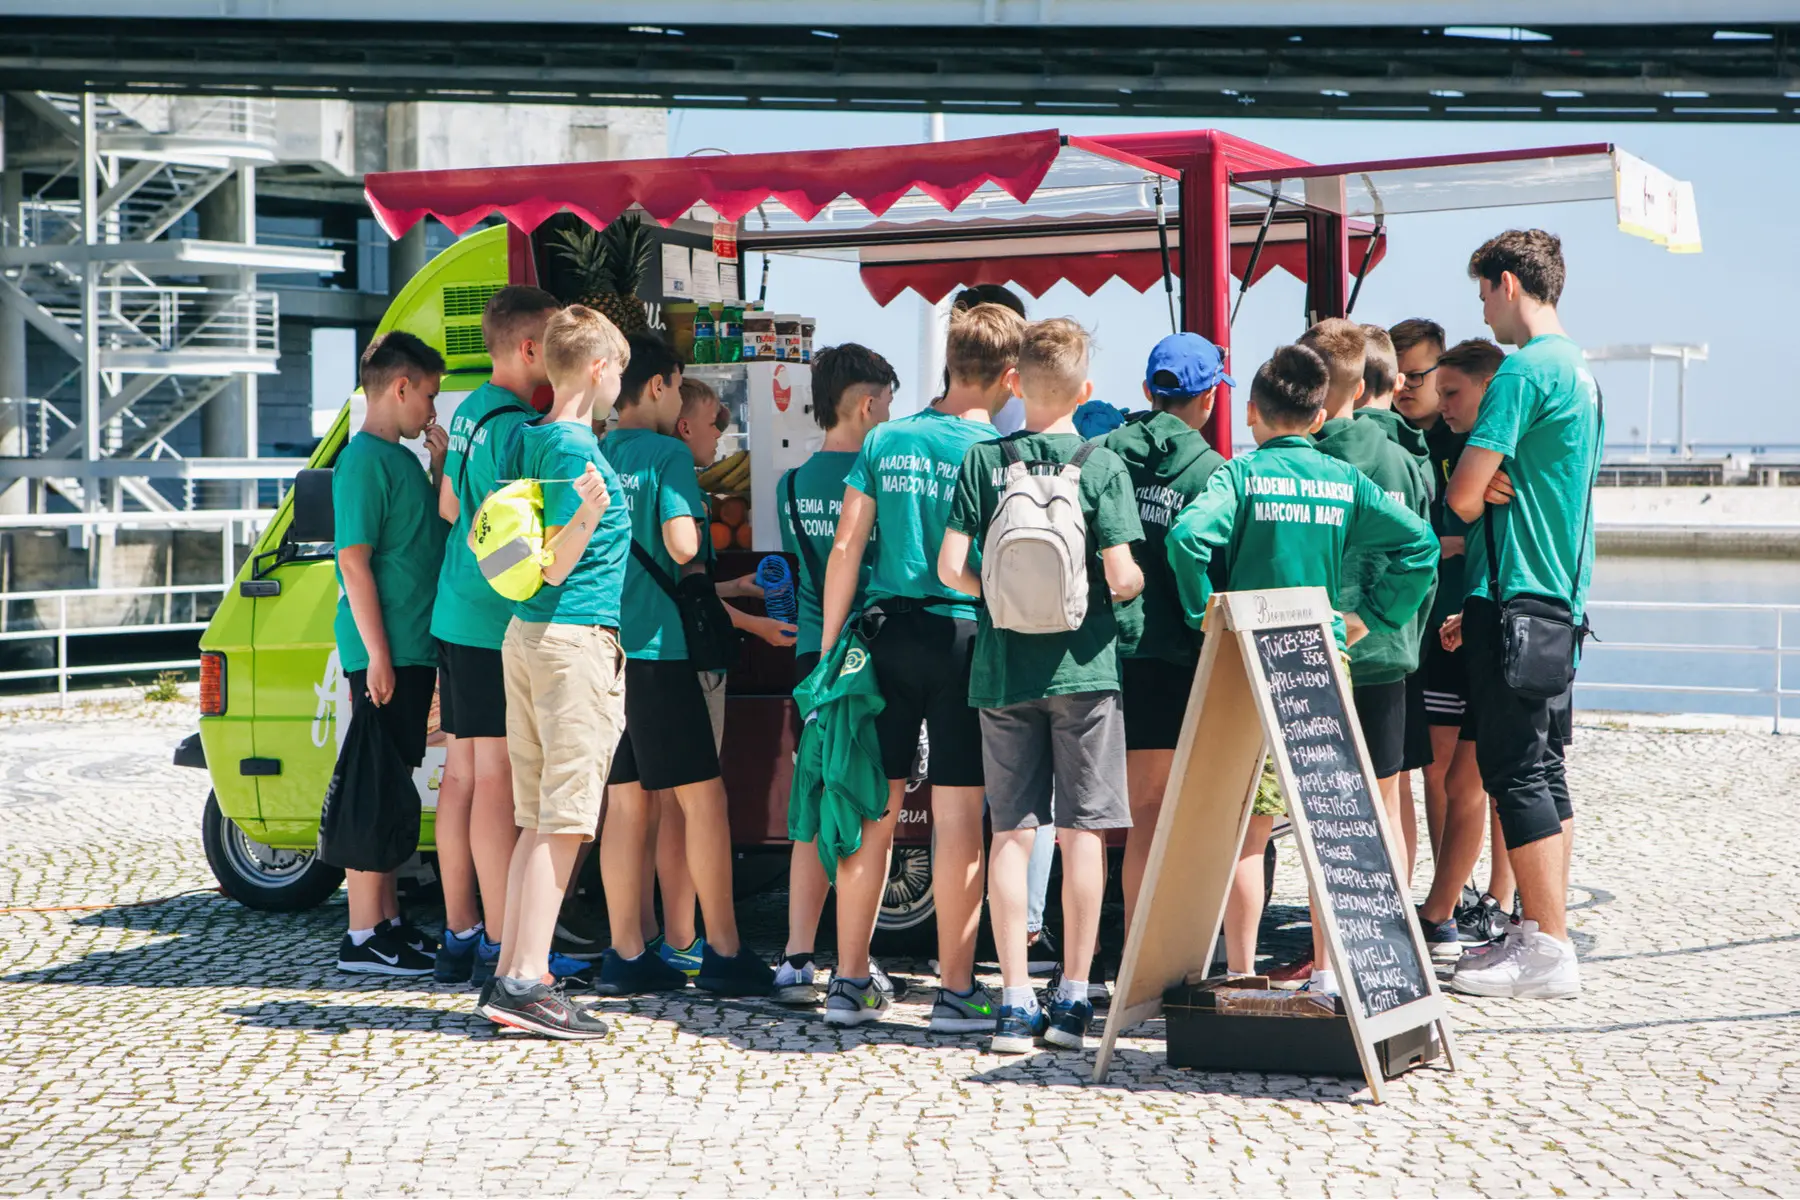 Students on a field trip in Portugal